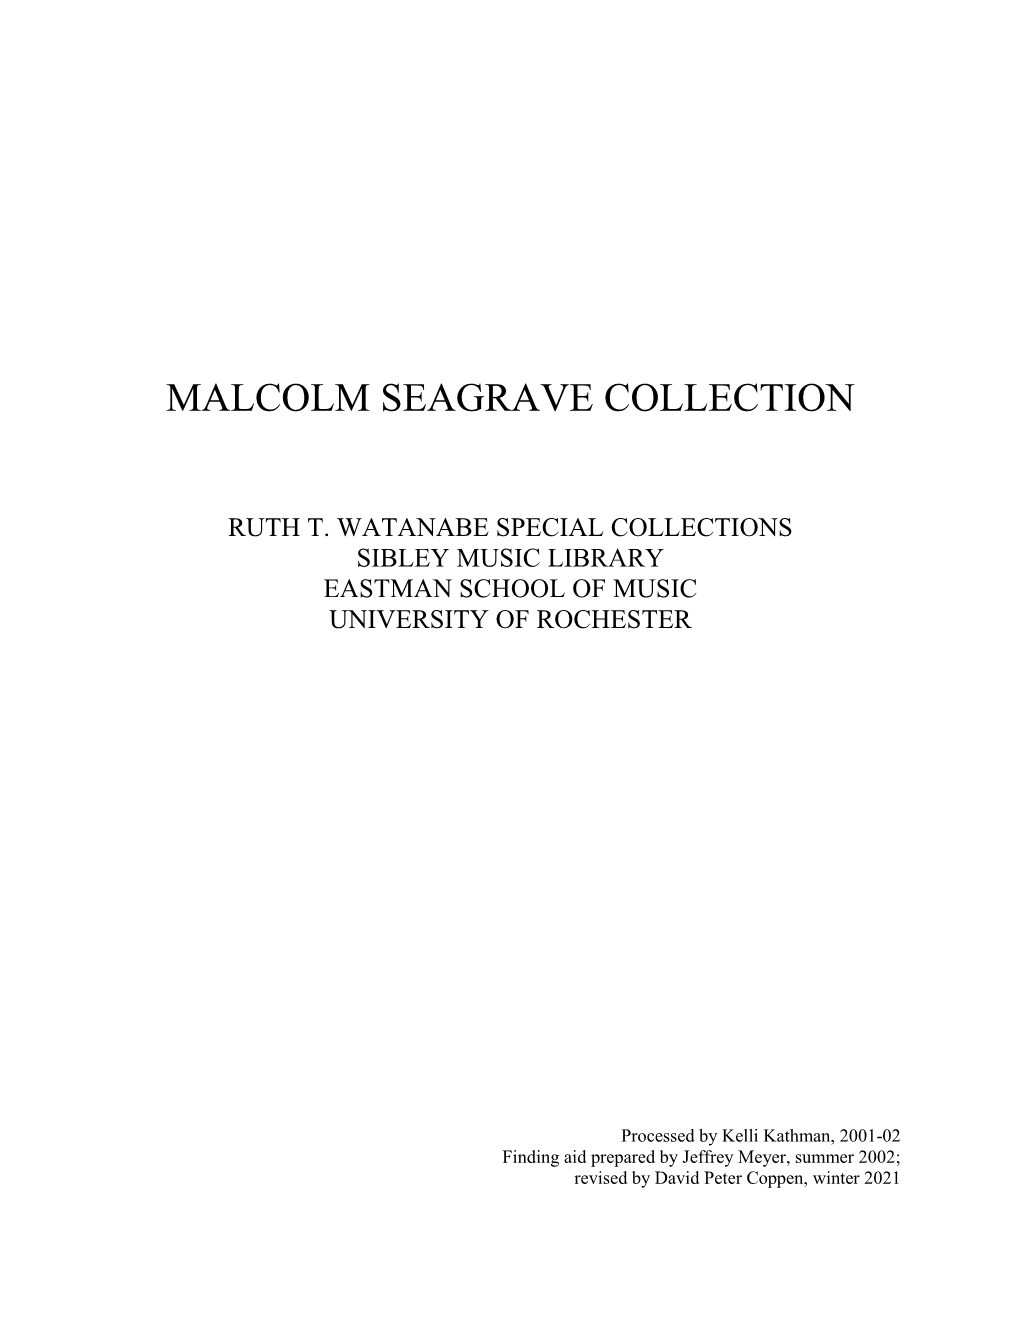 Malcolm Seagrave Collection